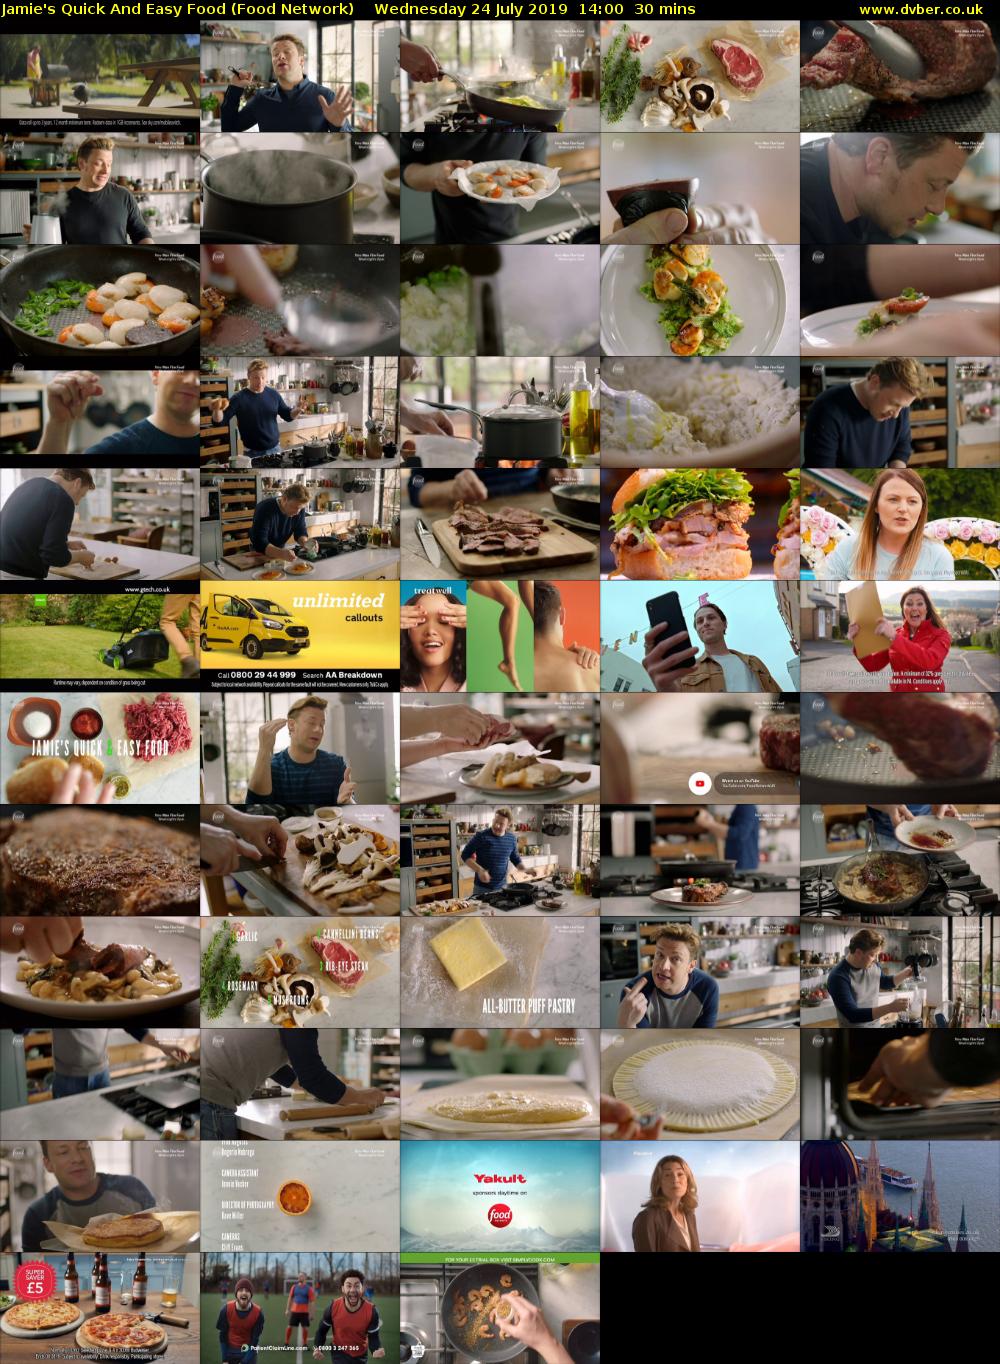 Jamie's Quick And Easy Food (Food Network) Wednesday 24 July 2019 14:00 - 14:30